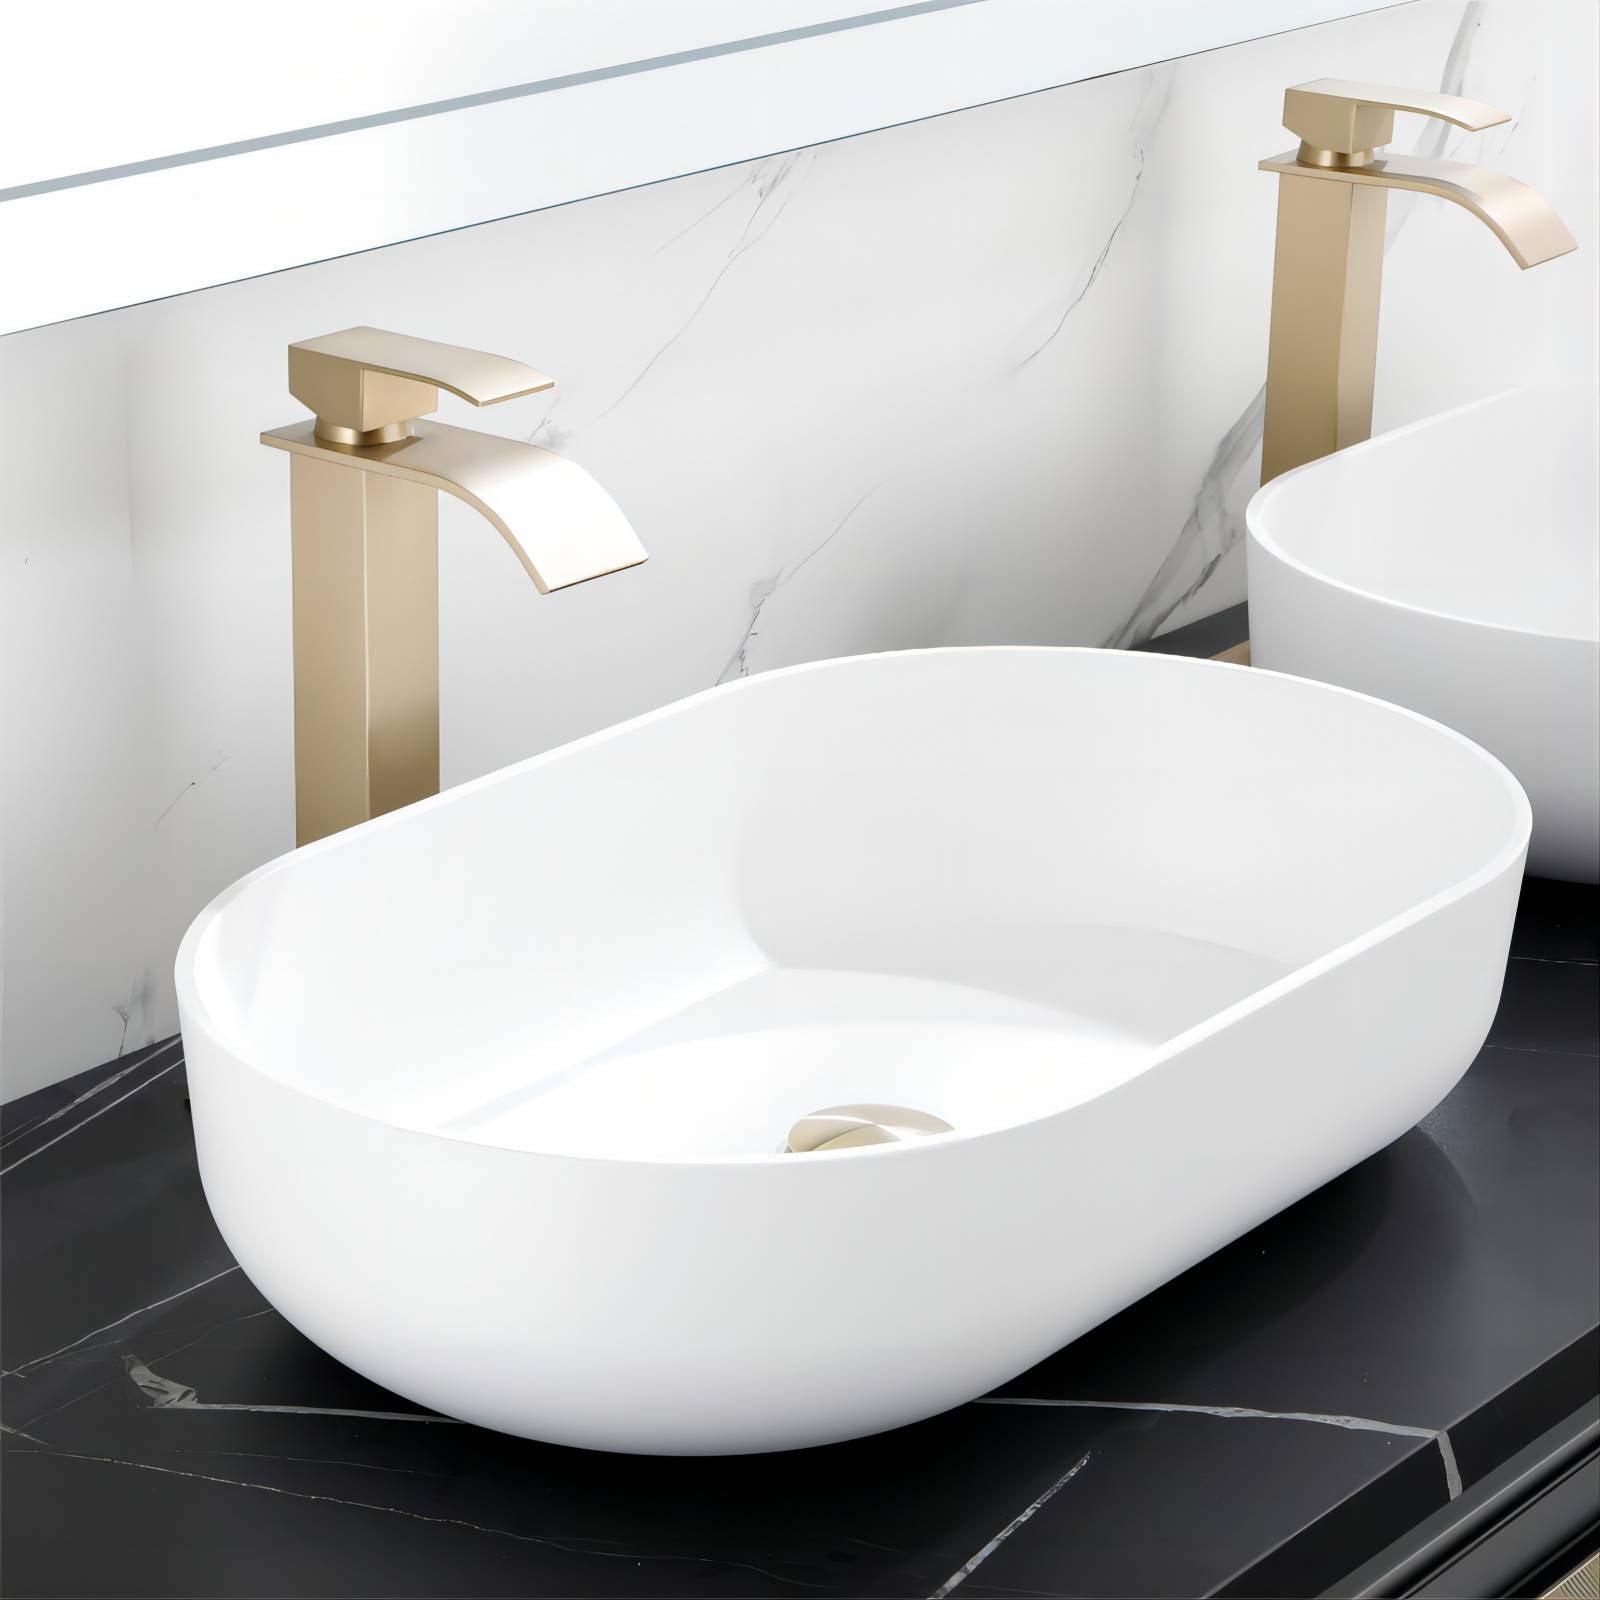 White Oval Above Bathroom Vessel Sink for Lavatory Vanity Cabinet